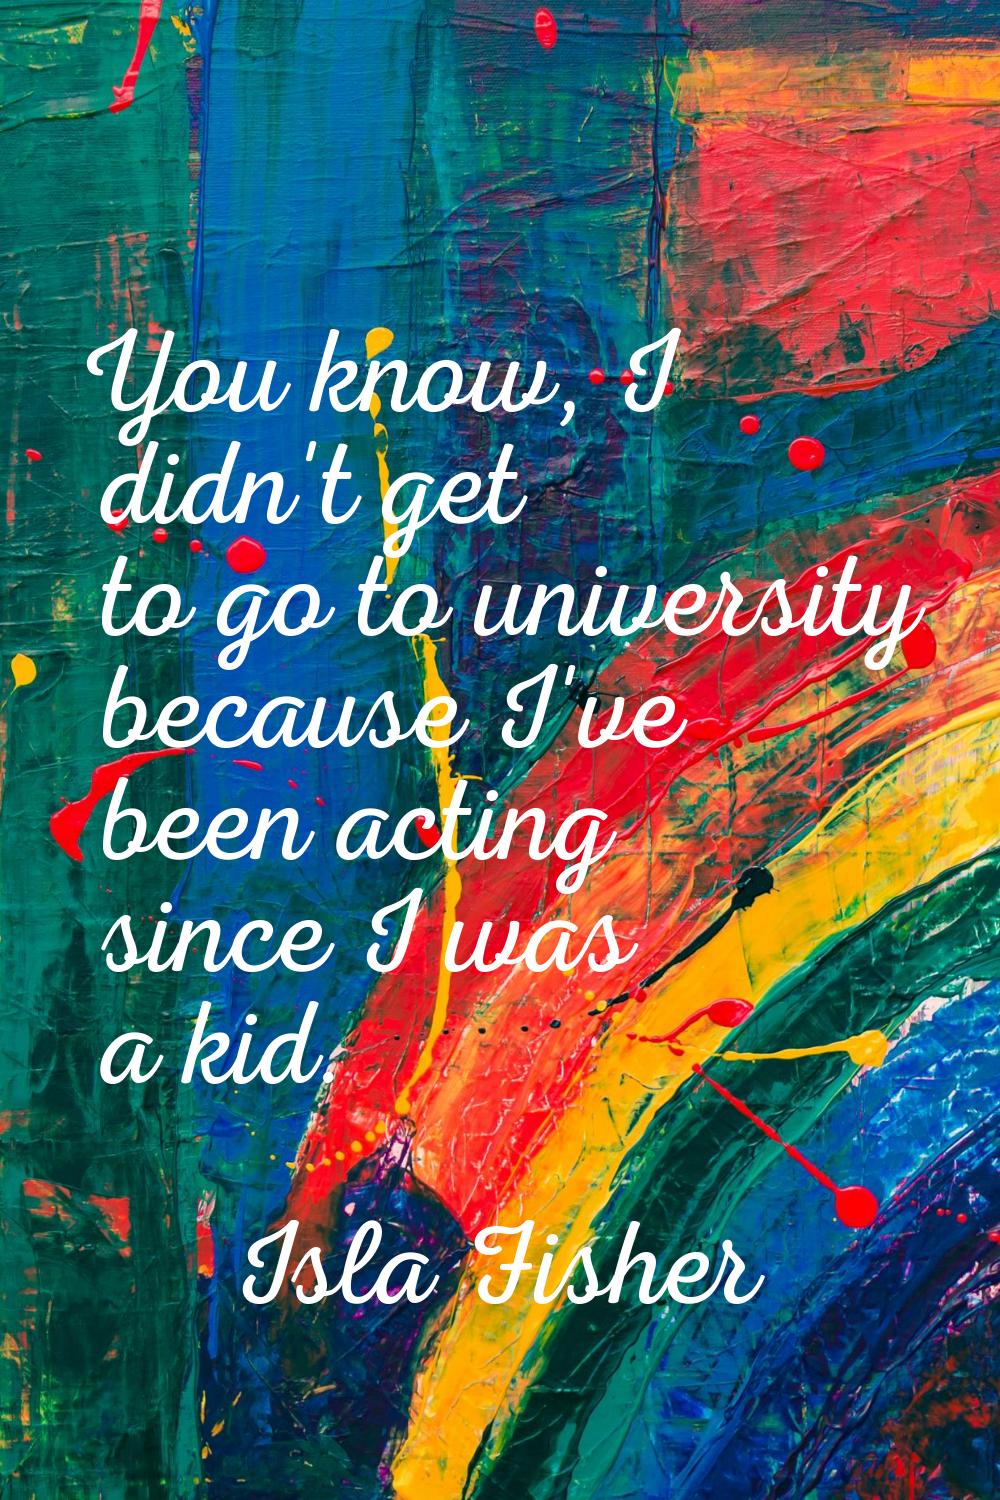 You know, I didn't get to go to university because I've been acting since I was a kid.